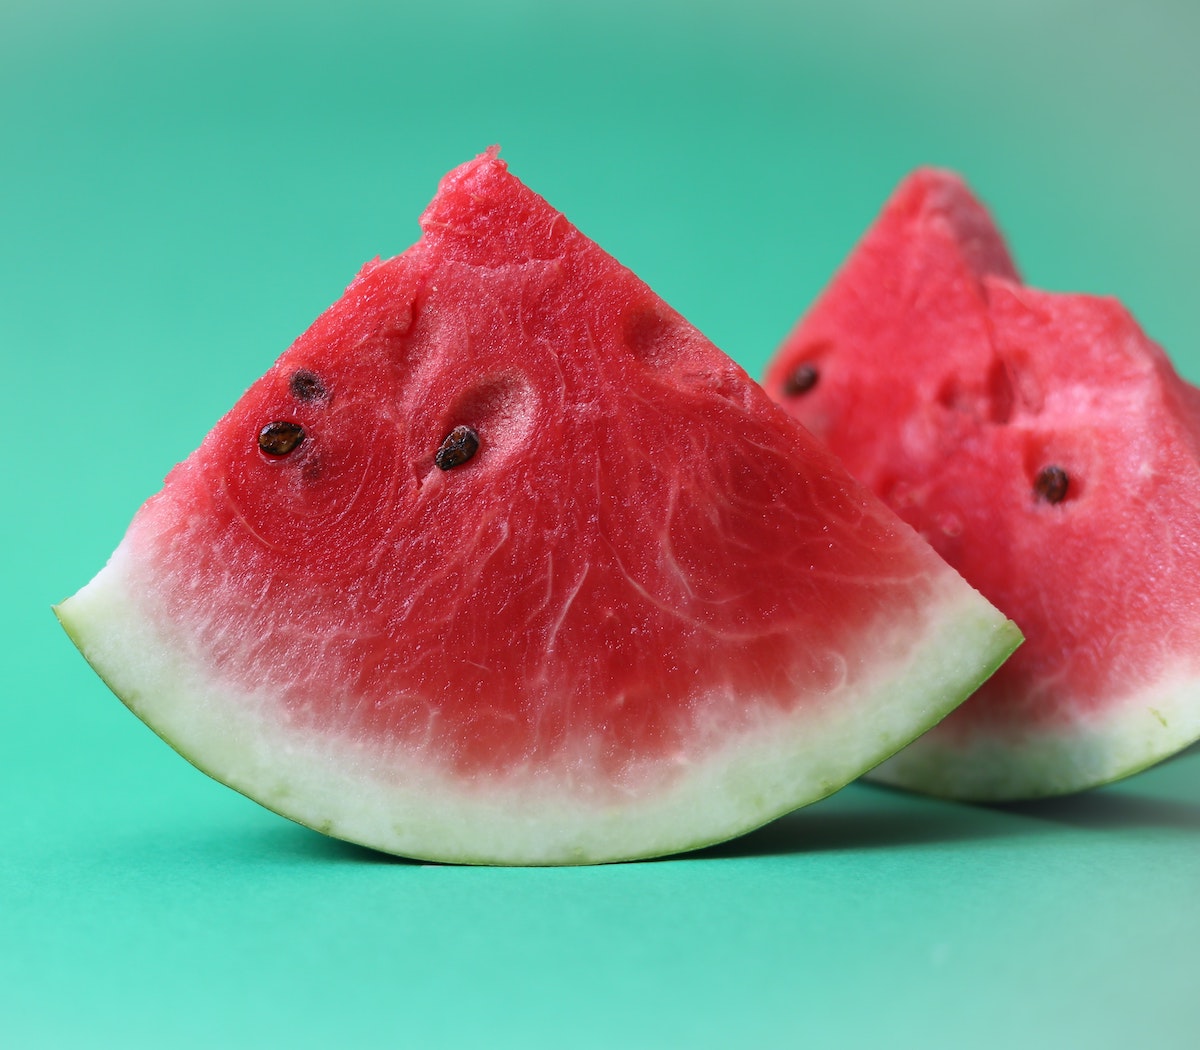 Two slices of watermelon in front of a teal background.